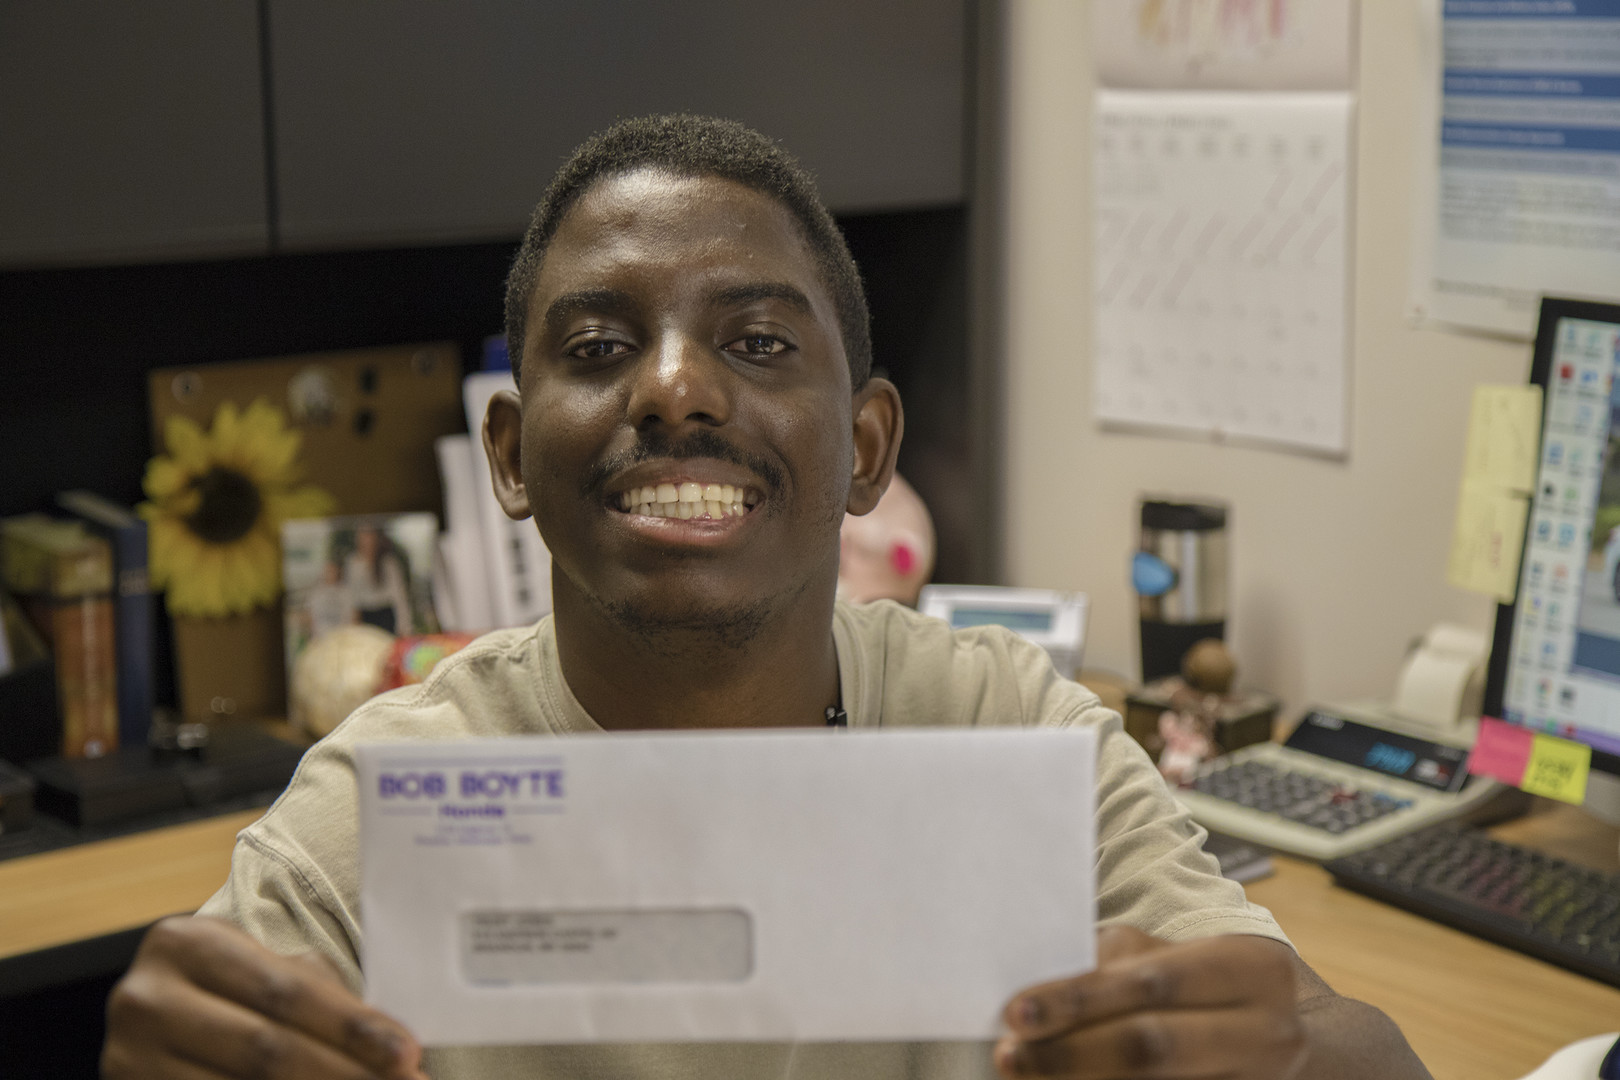 A man smiles as he holds an envelope up to the camera.